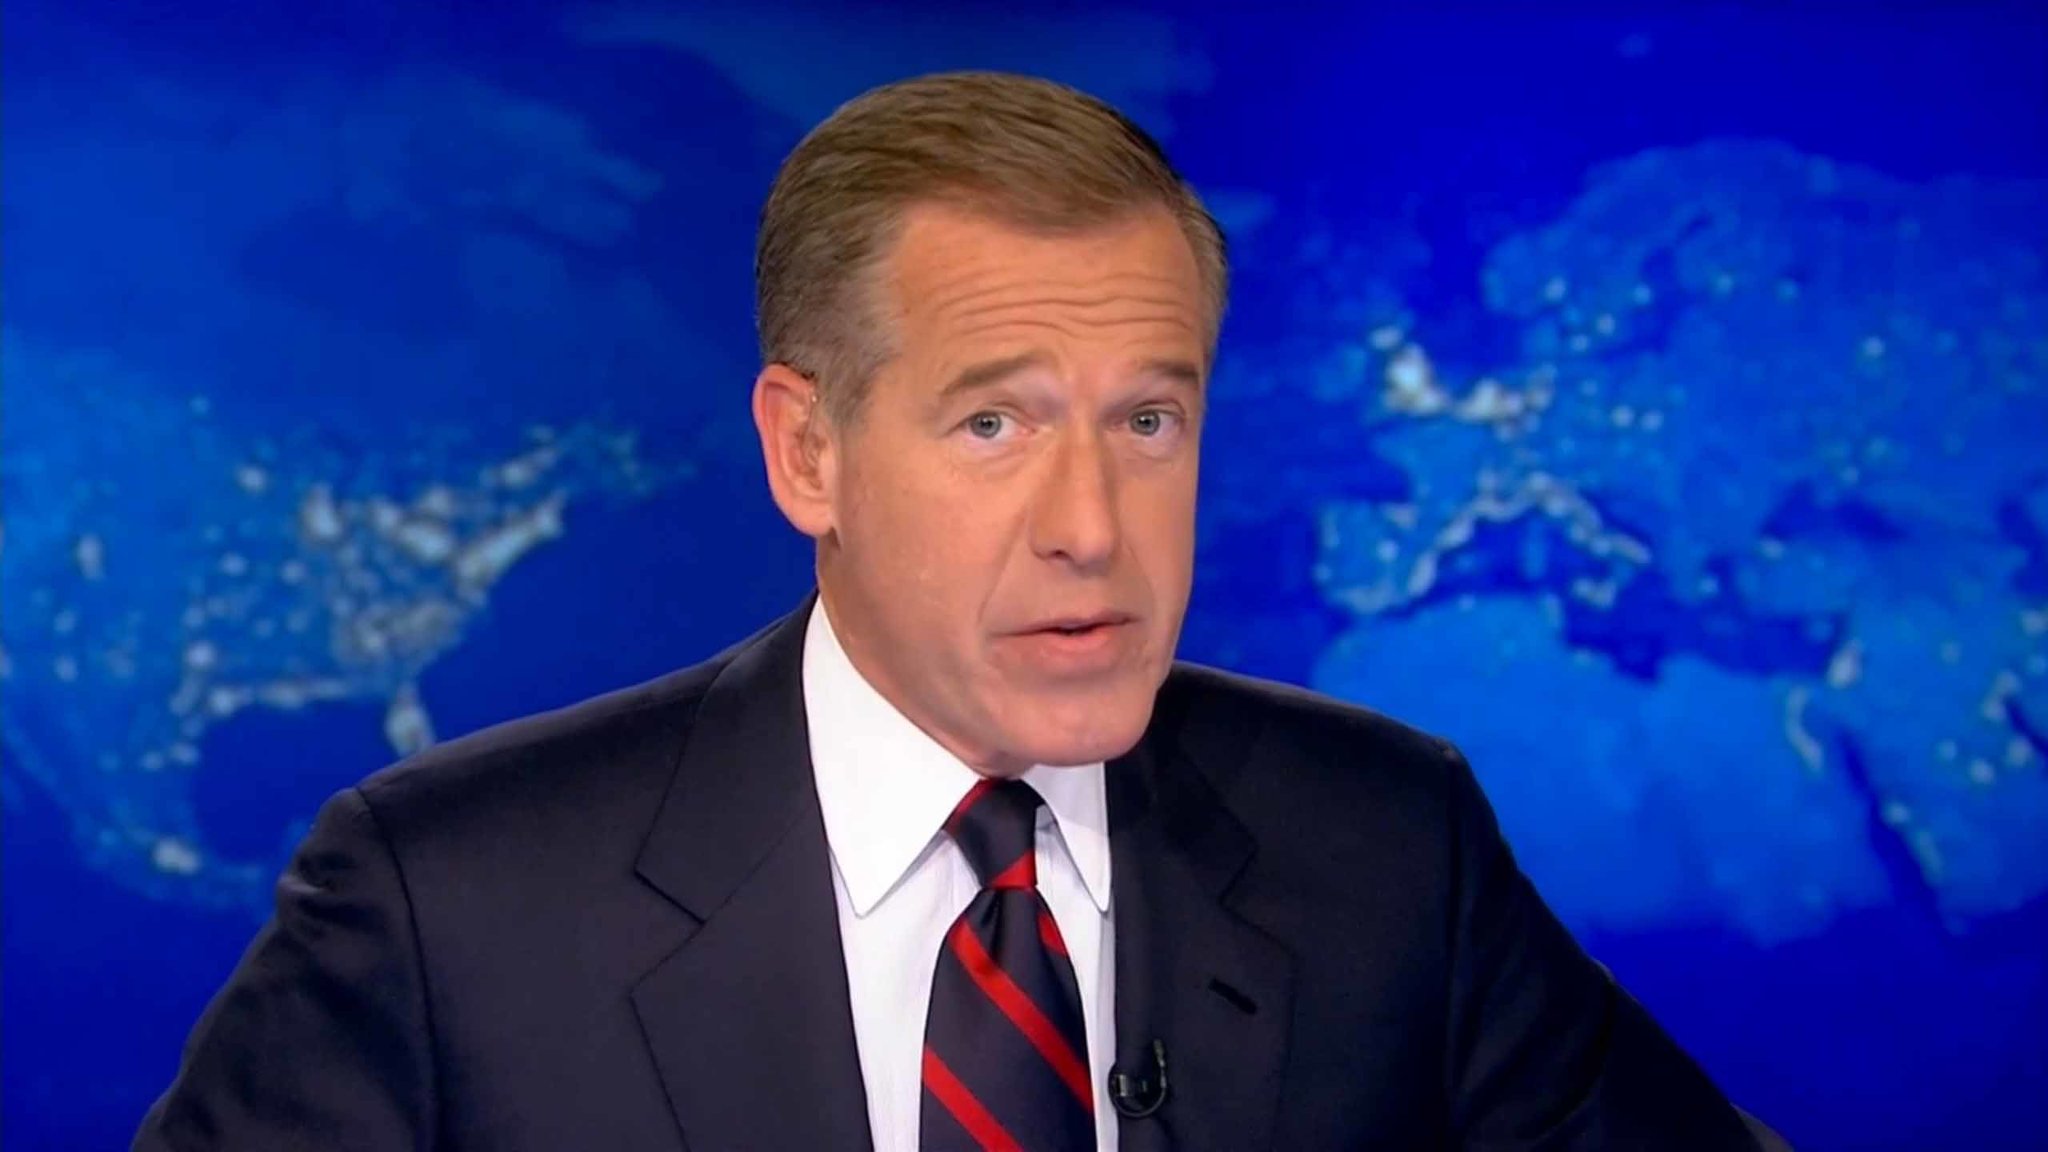 Who is Brian Williams